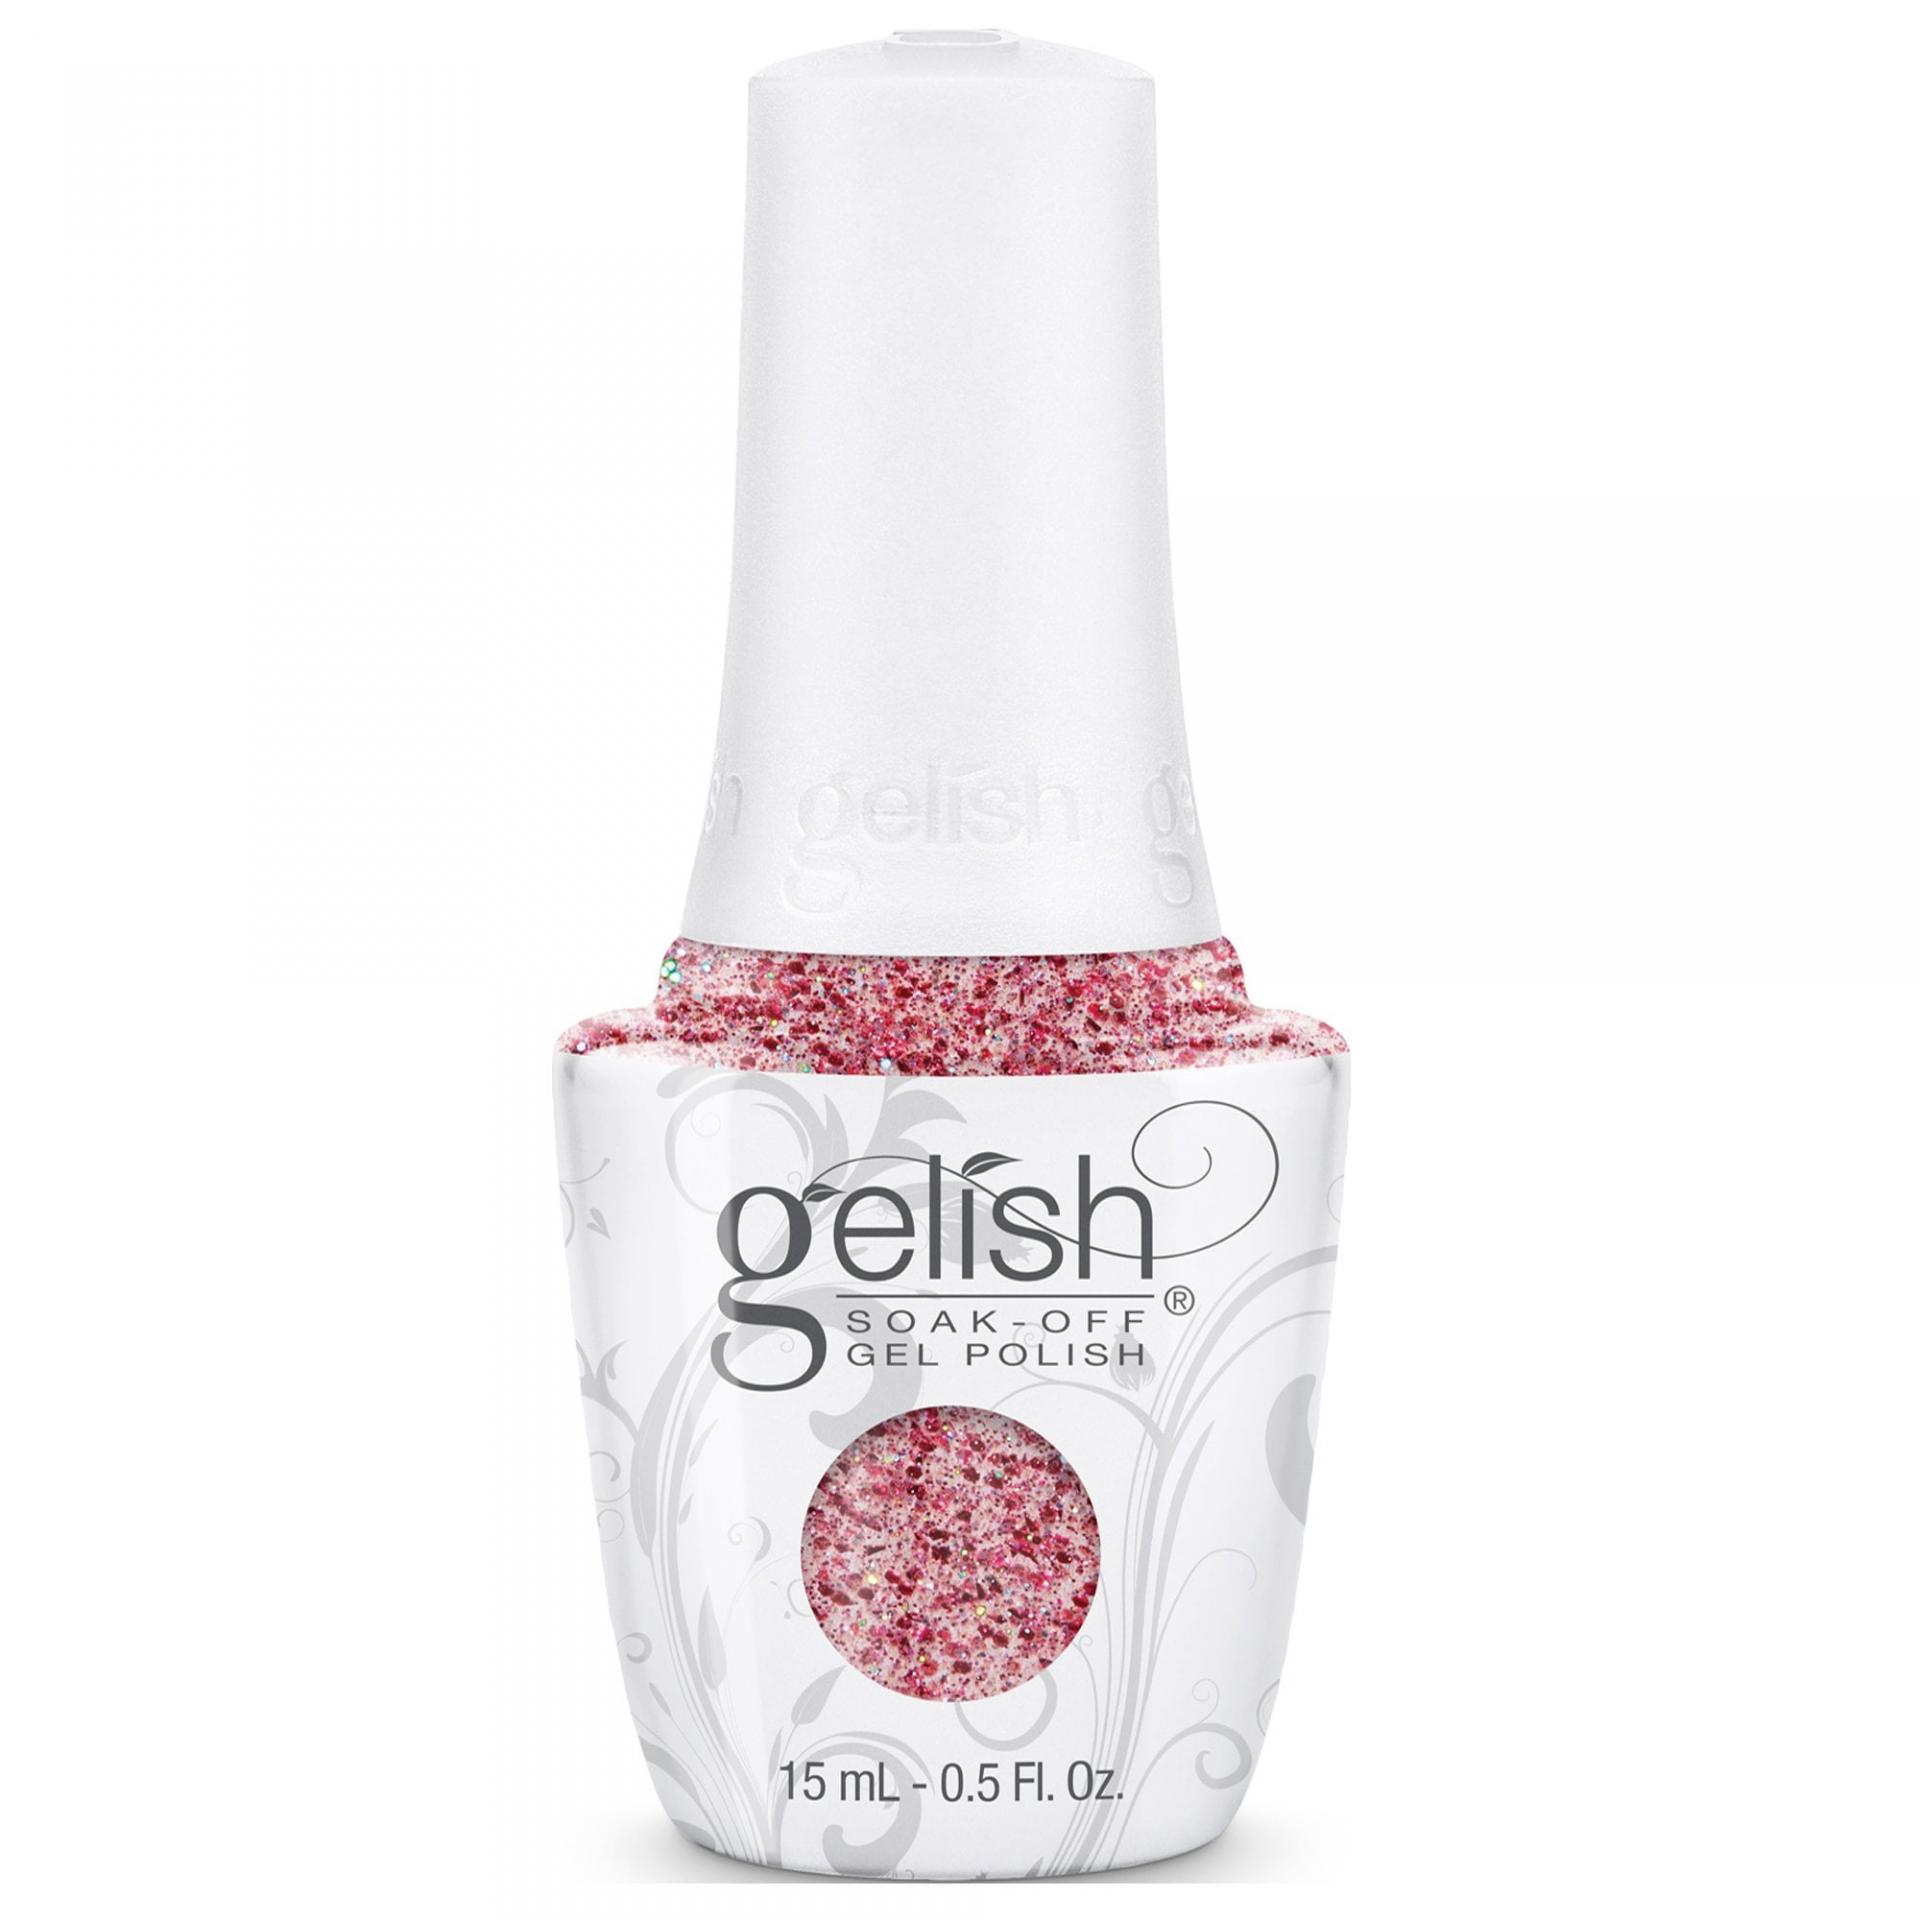 Gelish forever fabulous 2018 gel polish collection some like it red 15ml 1110332 p25754 100386 zoom